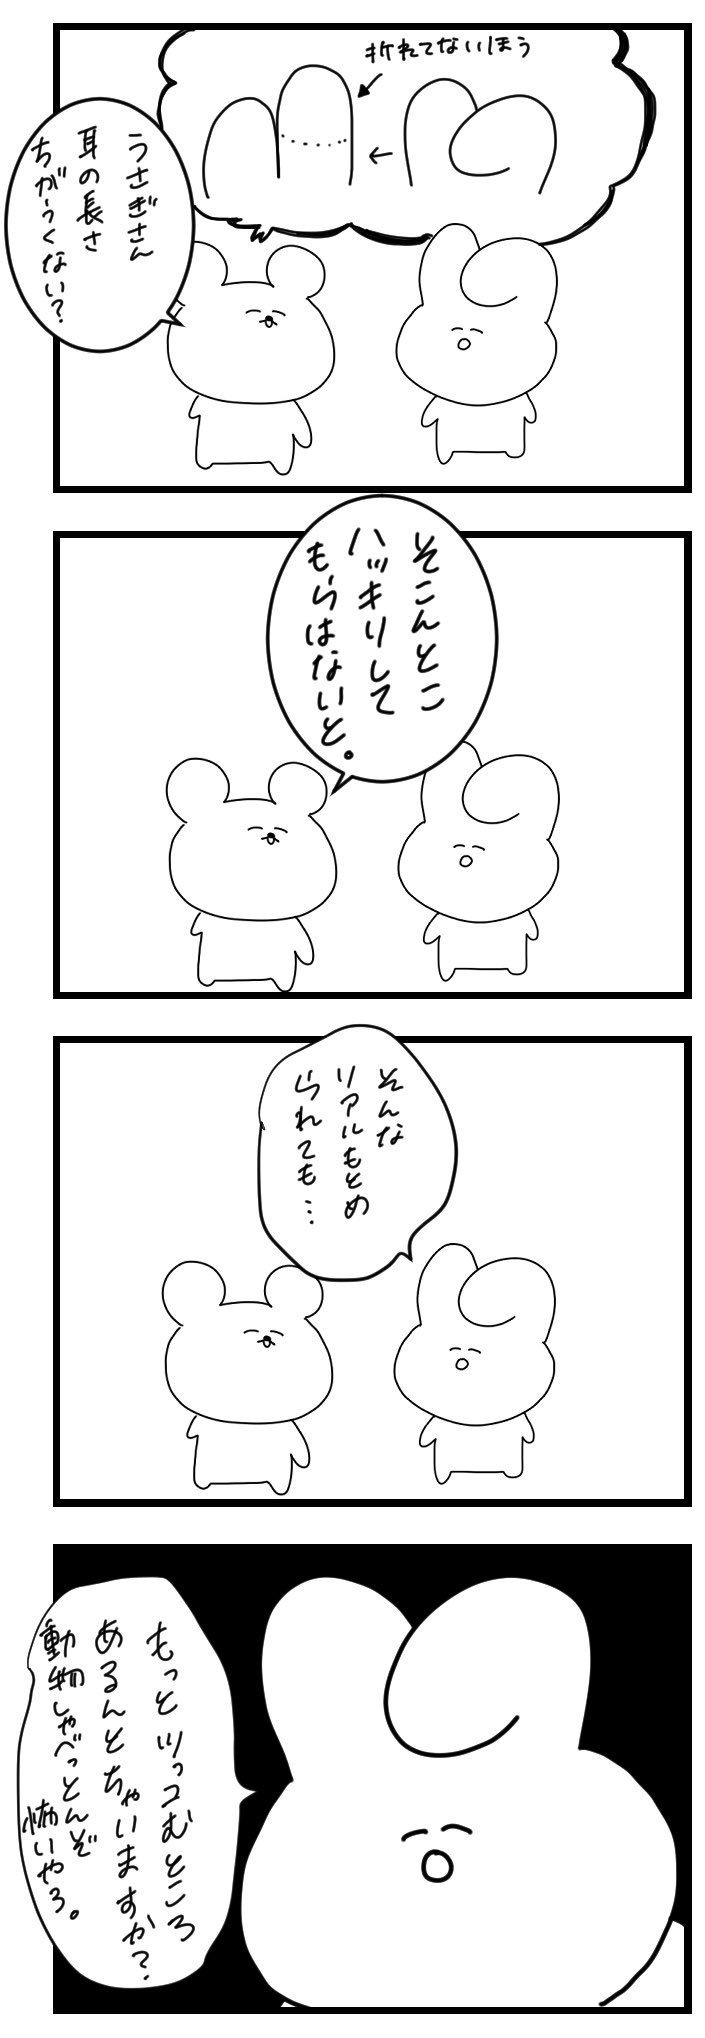 P丸様 のサヴ うさぎさんの耳の長さ違うくない ゆるふわ 4コマ漫画 T Co Ahwfdvz5an Twitter